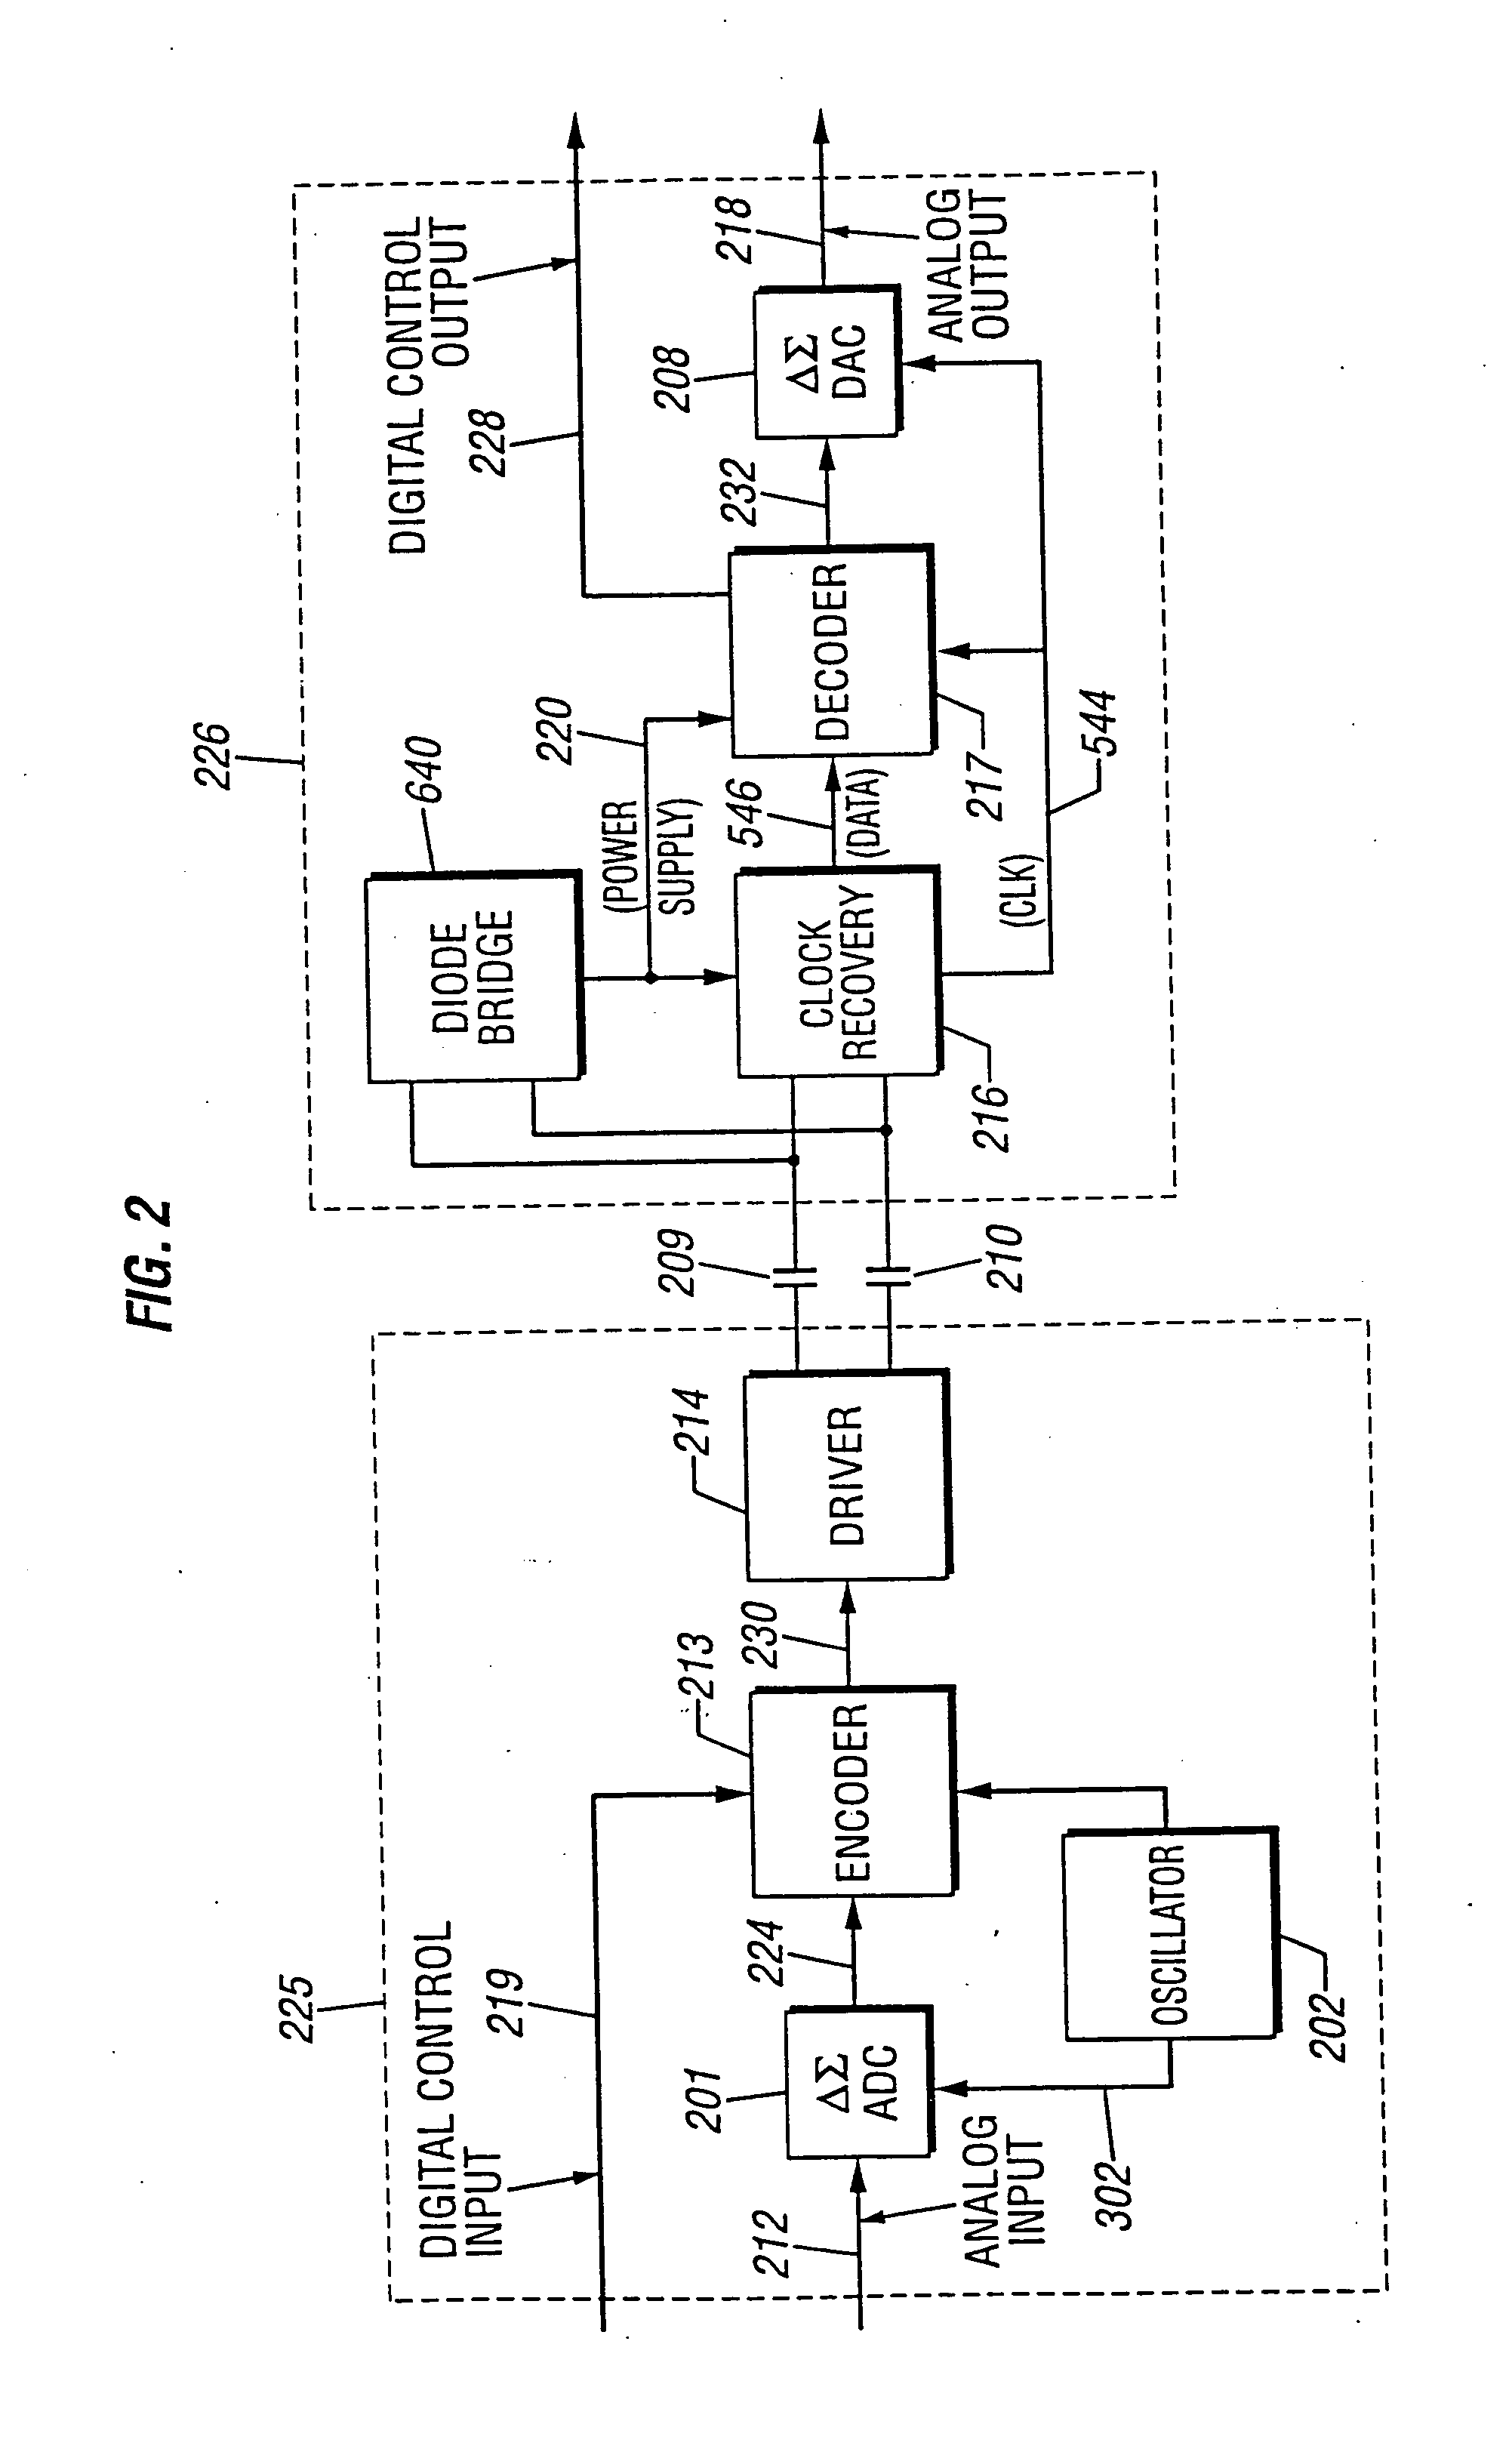 Direct digital access arrangement circuitry and method for connecting DSL circuitry to phone lines